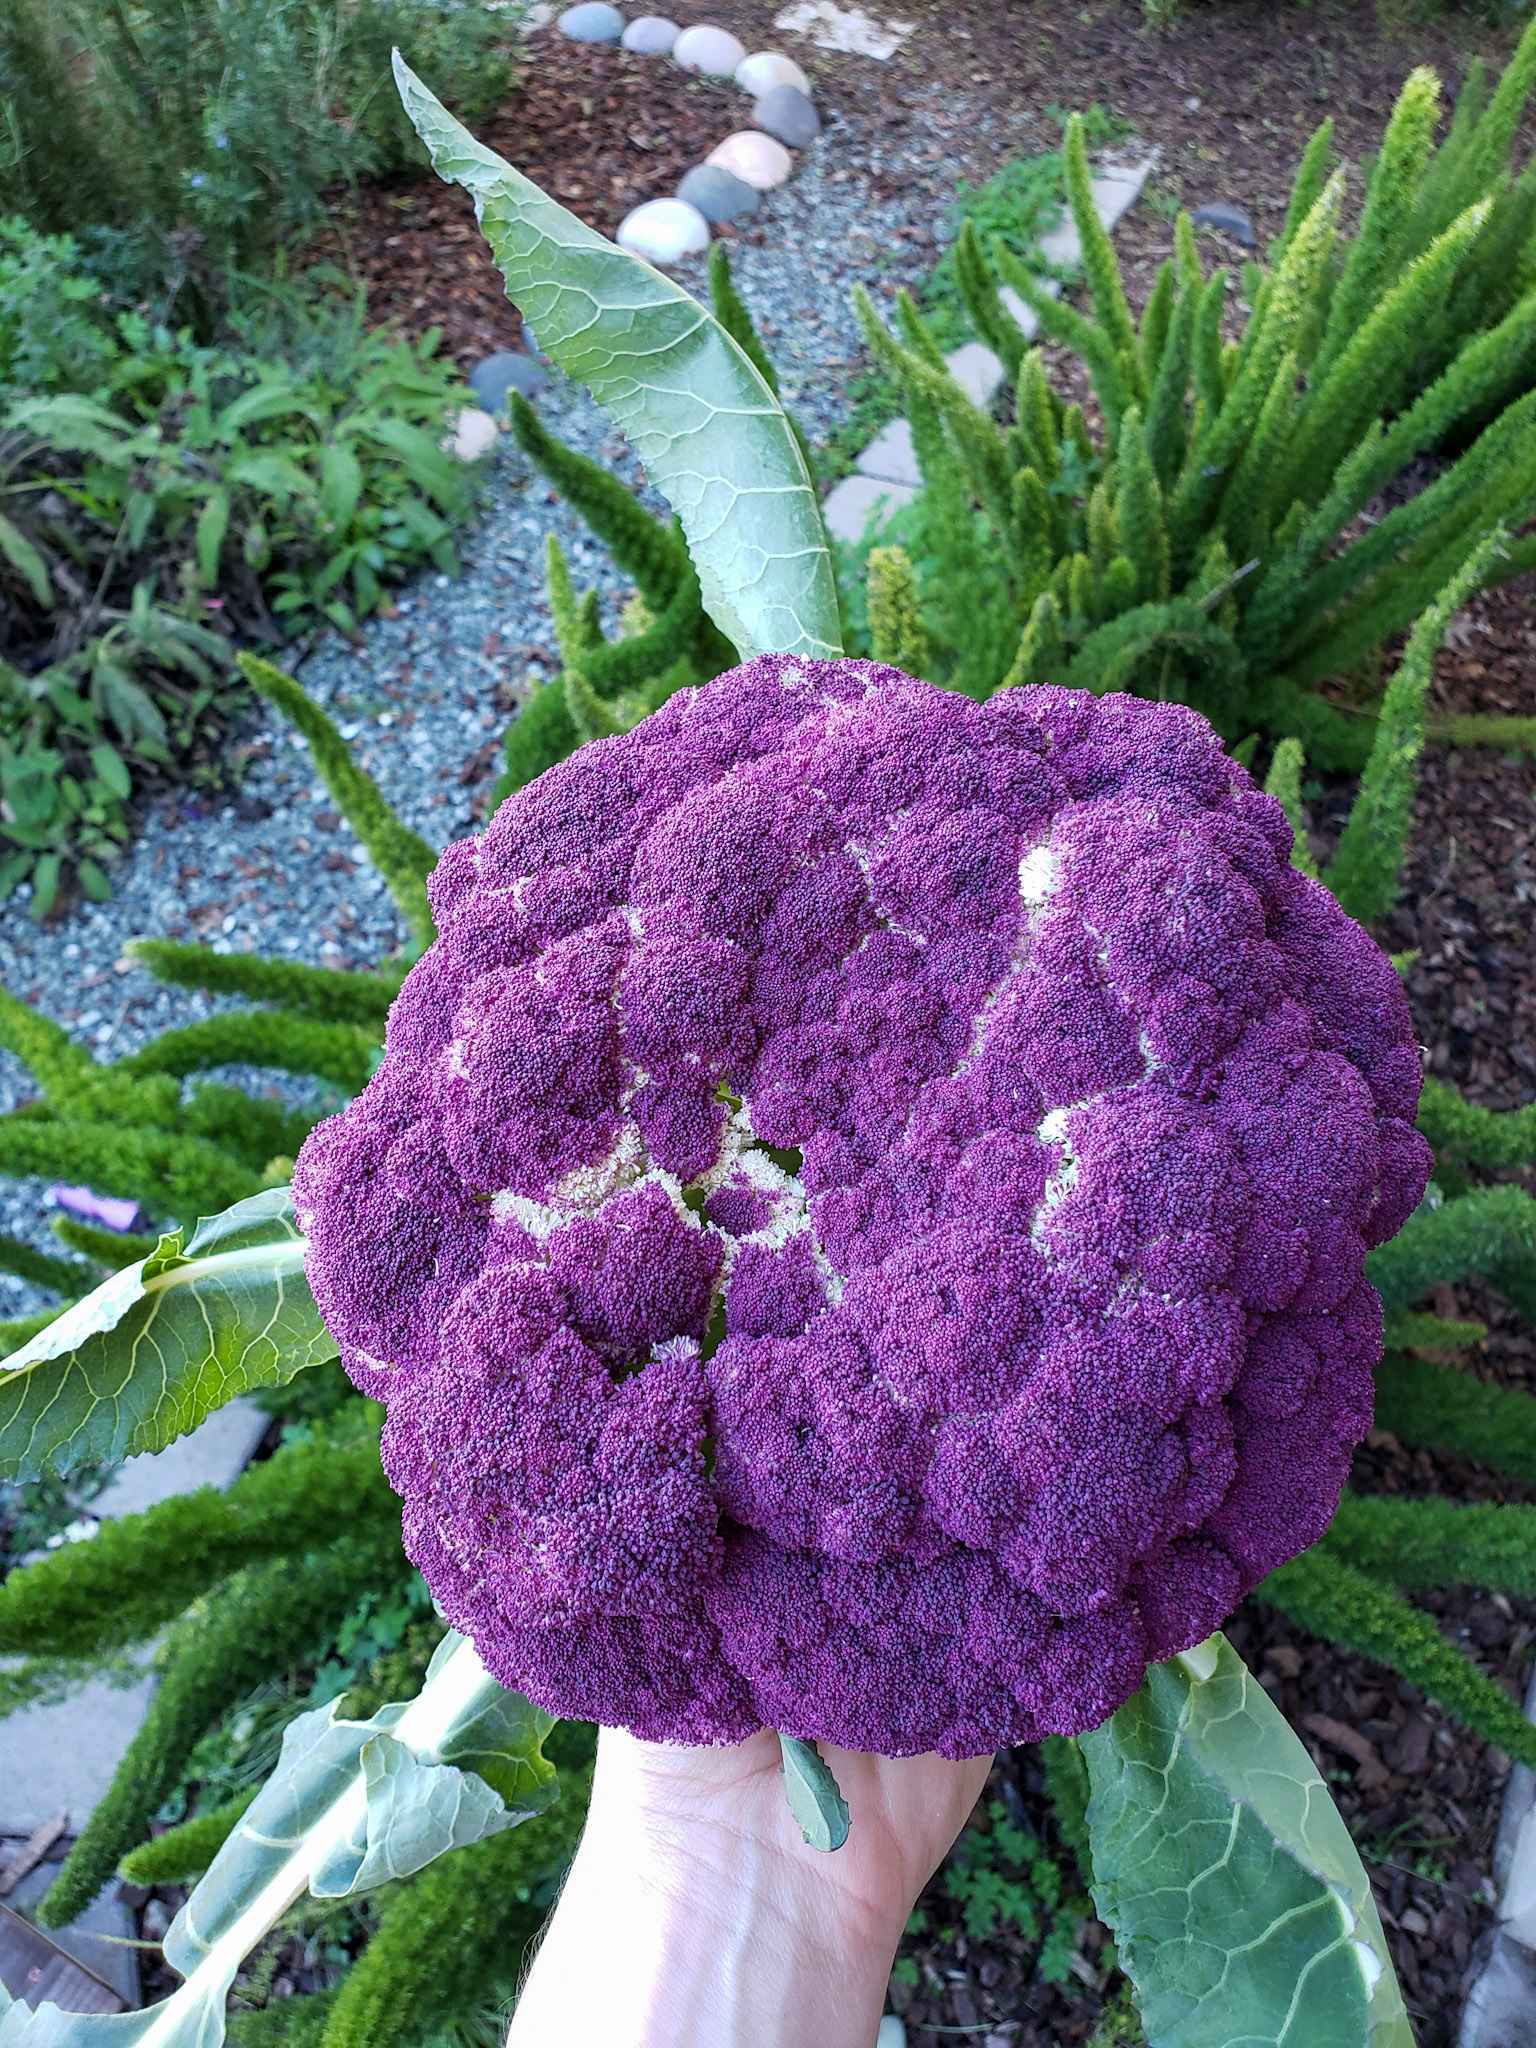 A hand is holding a head of purple cauliflower which shows portions of white on the inside edges of the head. Beyond that lies foxtail ferns, hummingbird sage, and rosemary planted out in borders along a gravel walkway. 